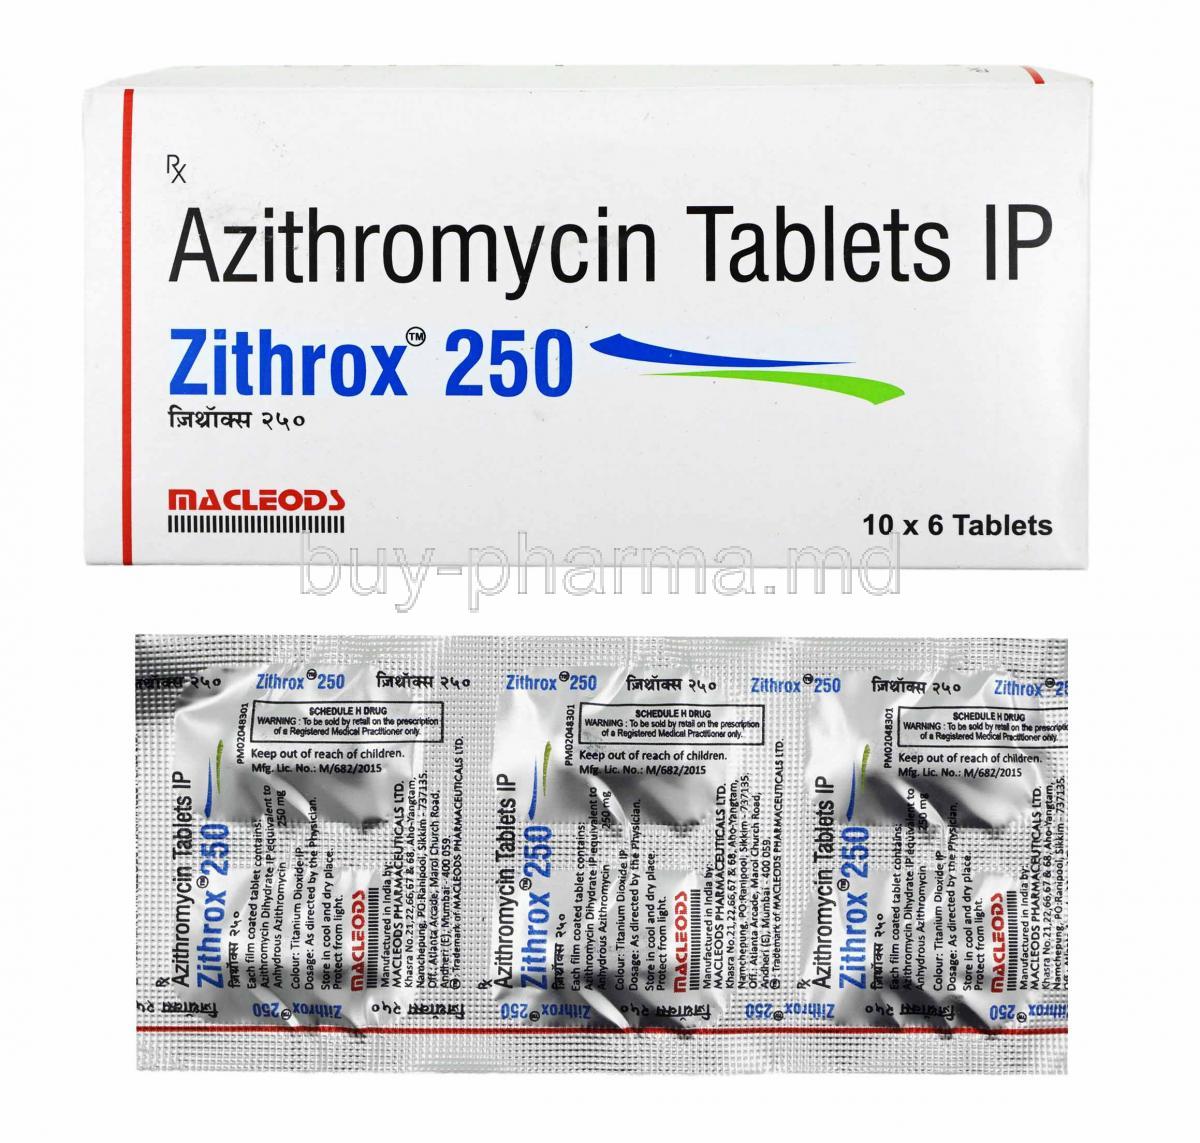 Zithrox, Azithromycin 250mg box and tablets